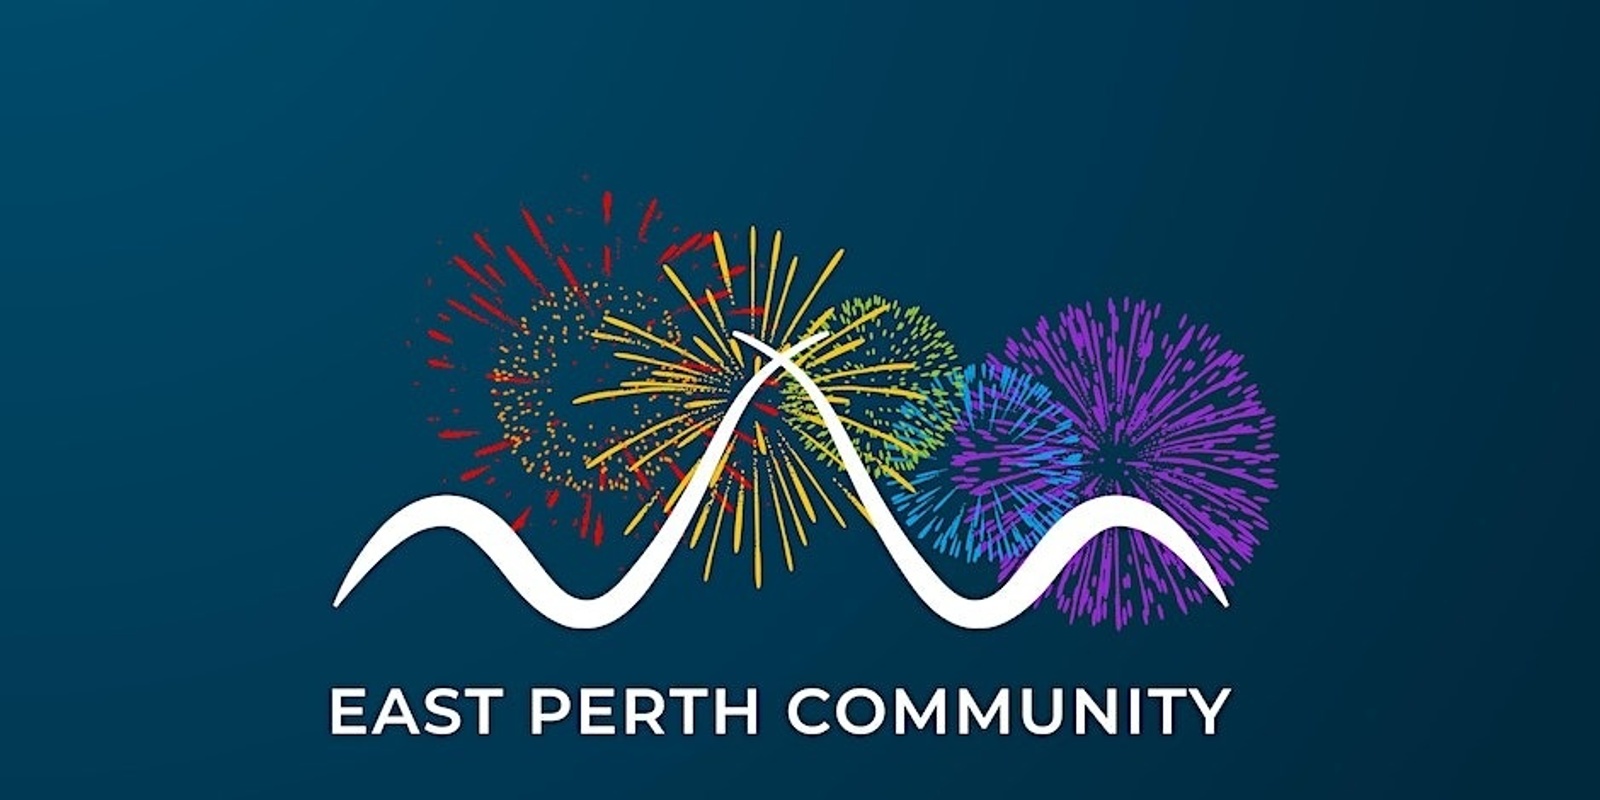 East Perth Community Group's banner